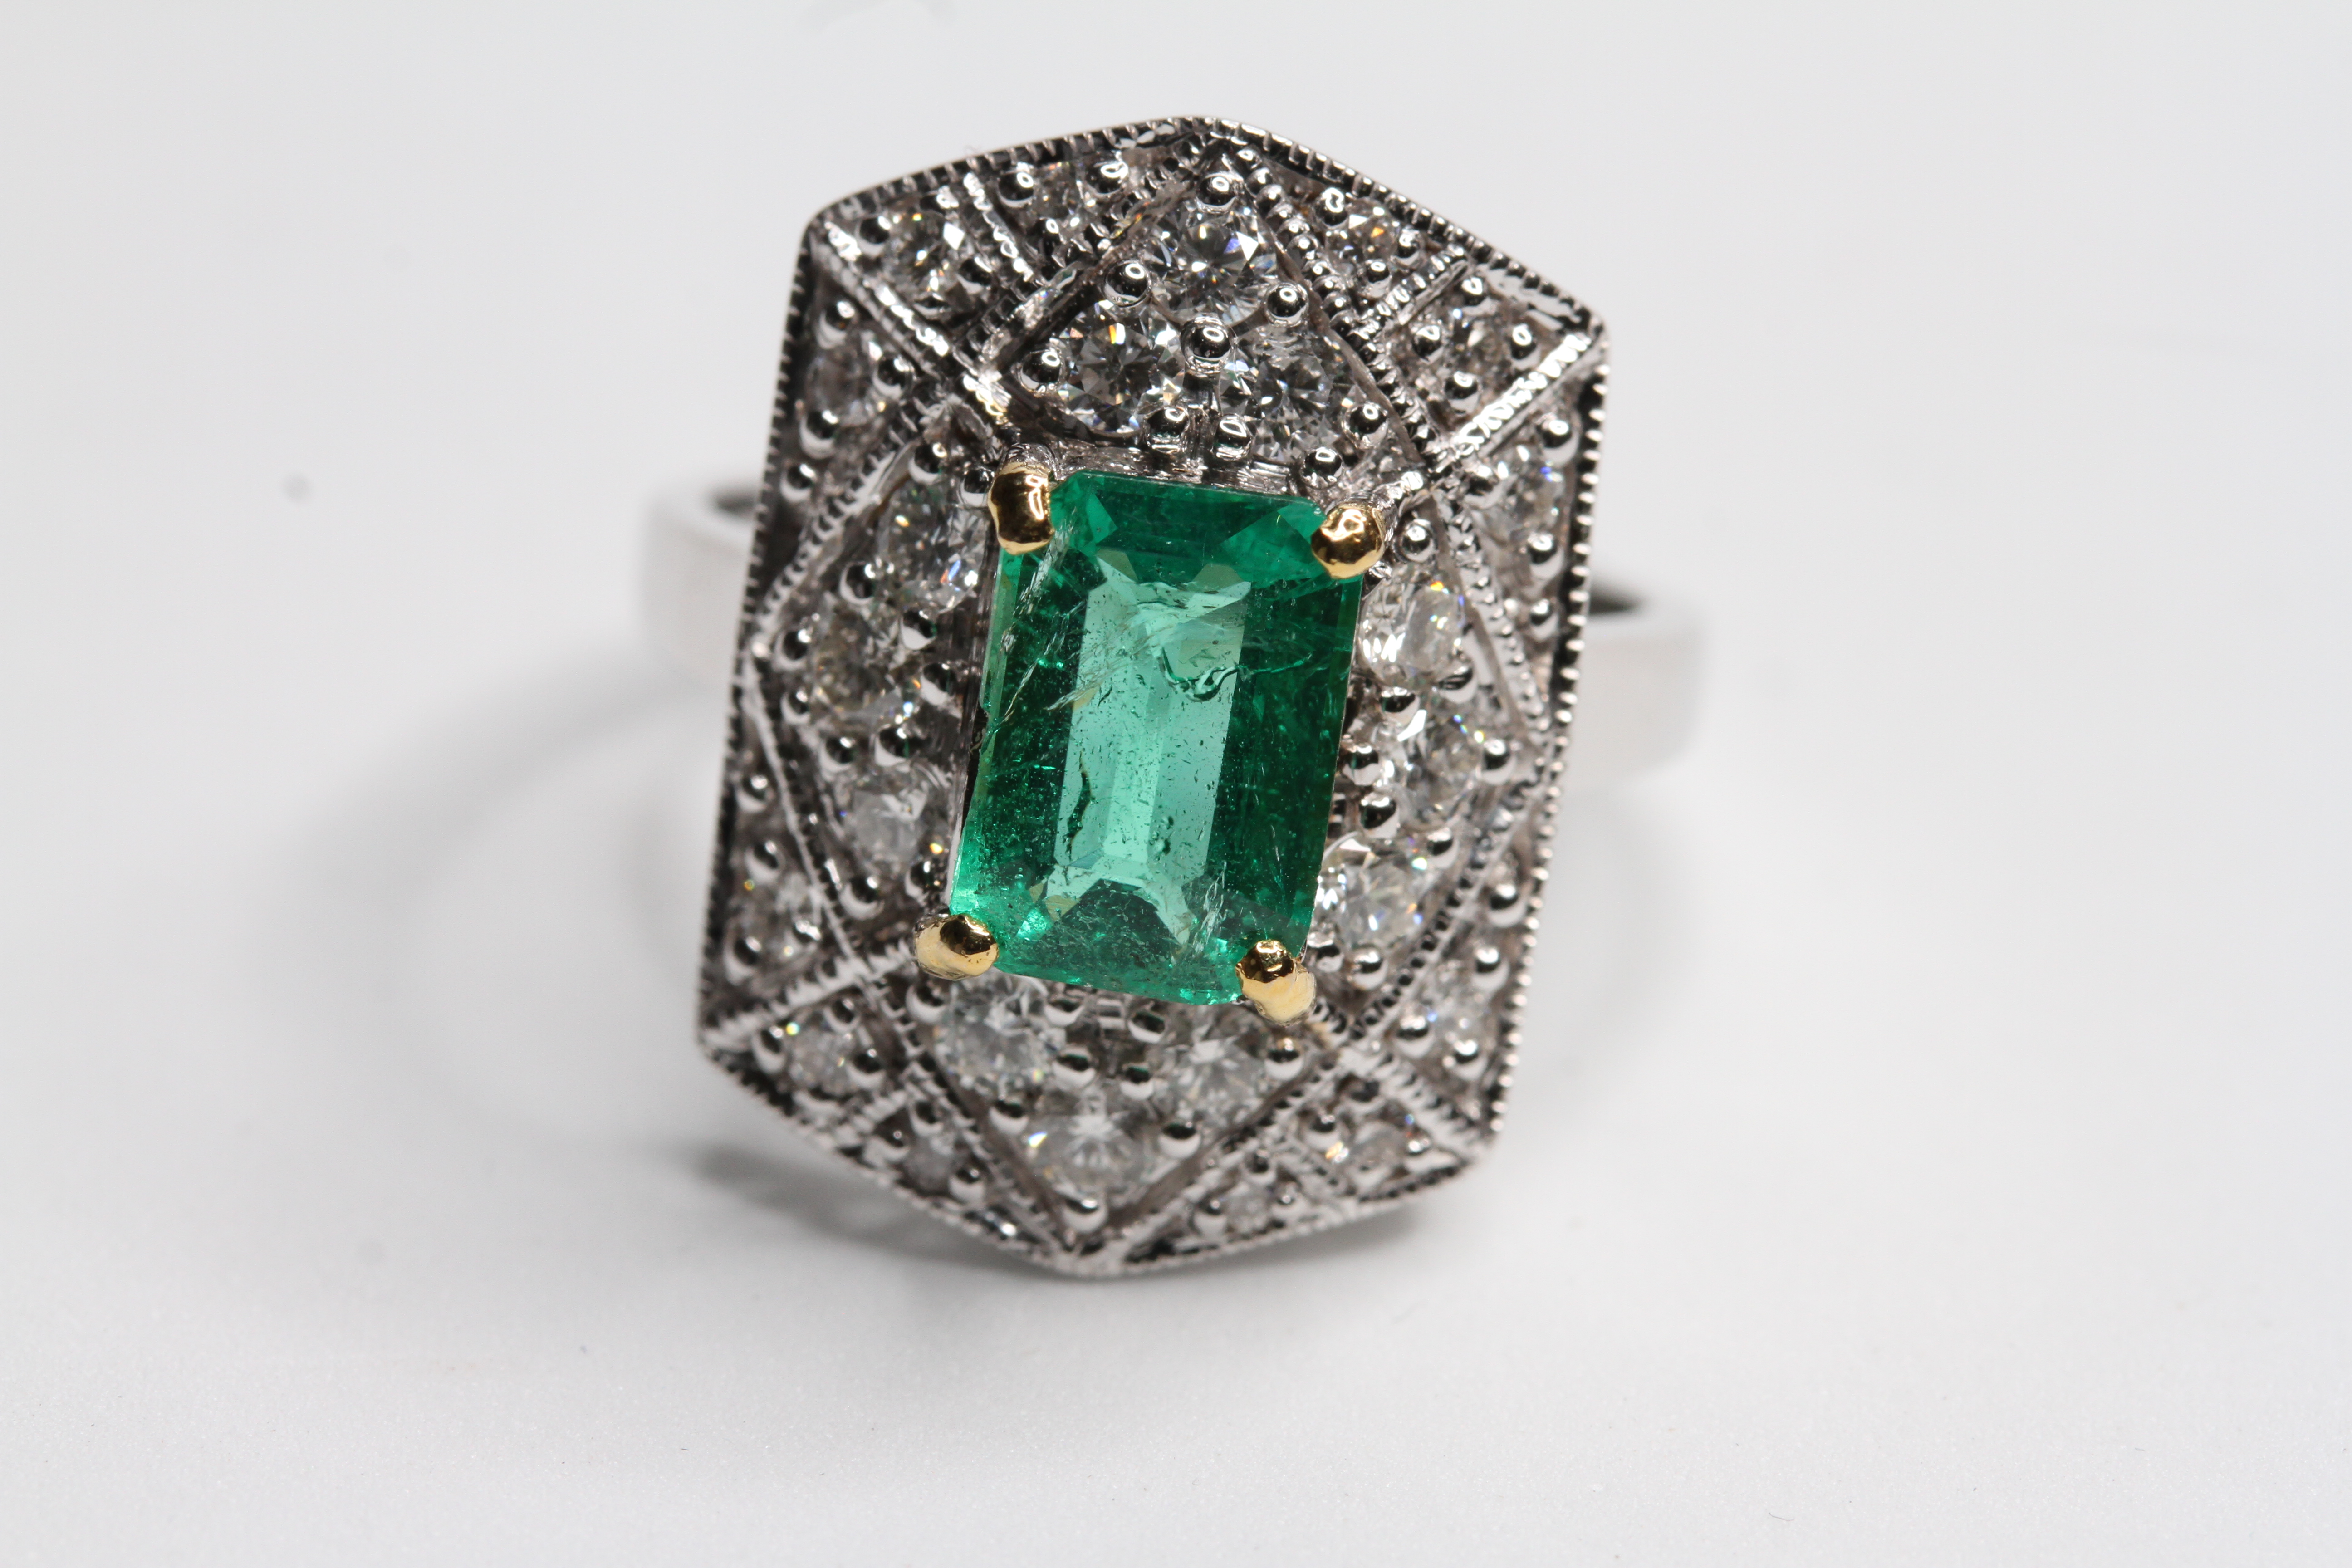 18WG Pave set diamond tablet ring with central claw set Emerald. EstE1.65 cts